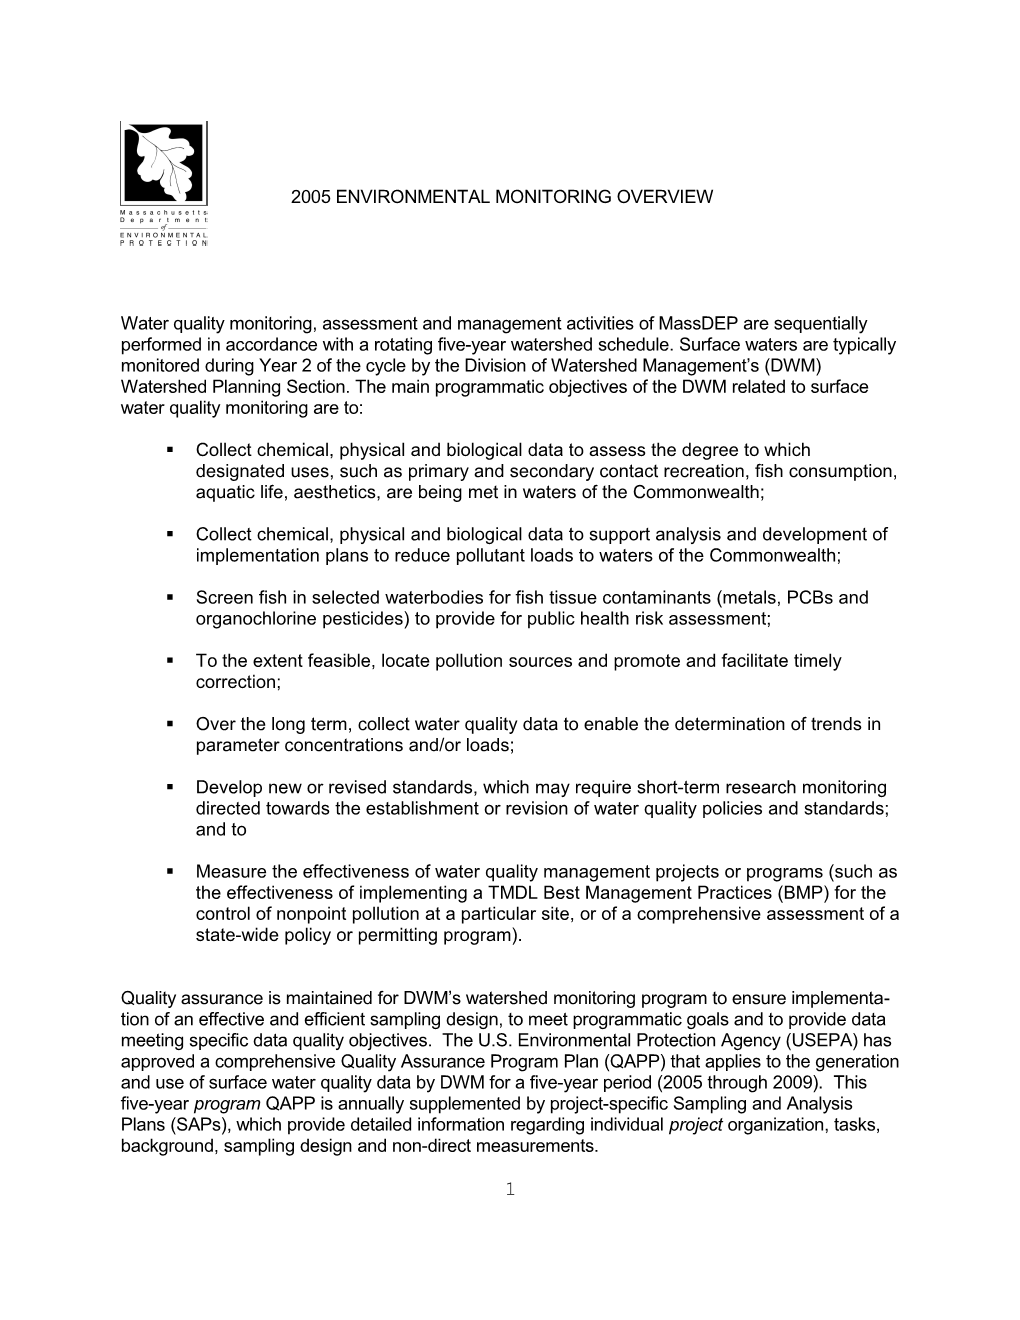 2005 Environmental Monitoring Overview